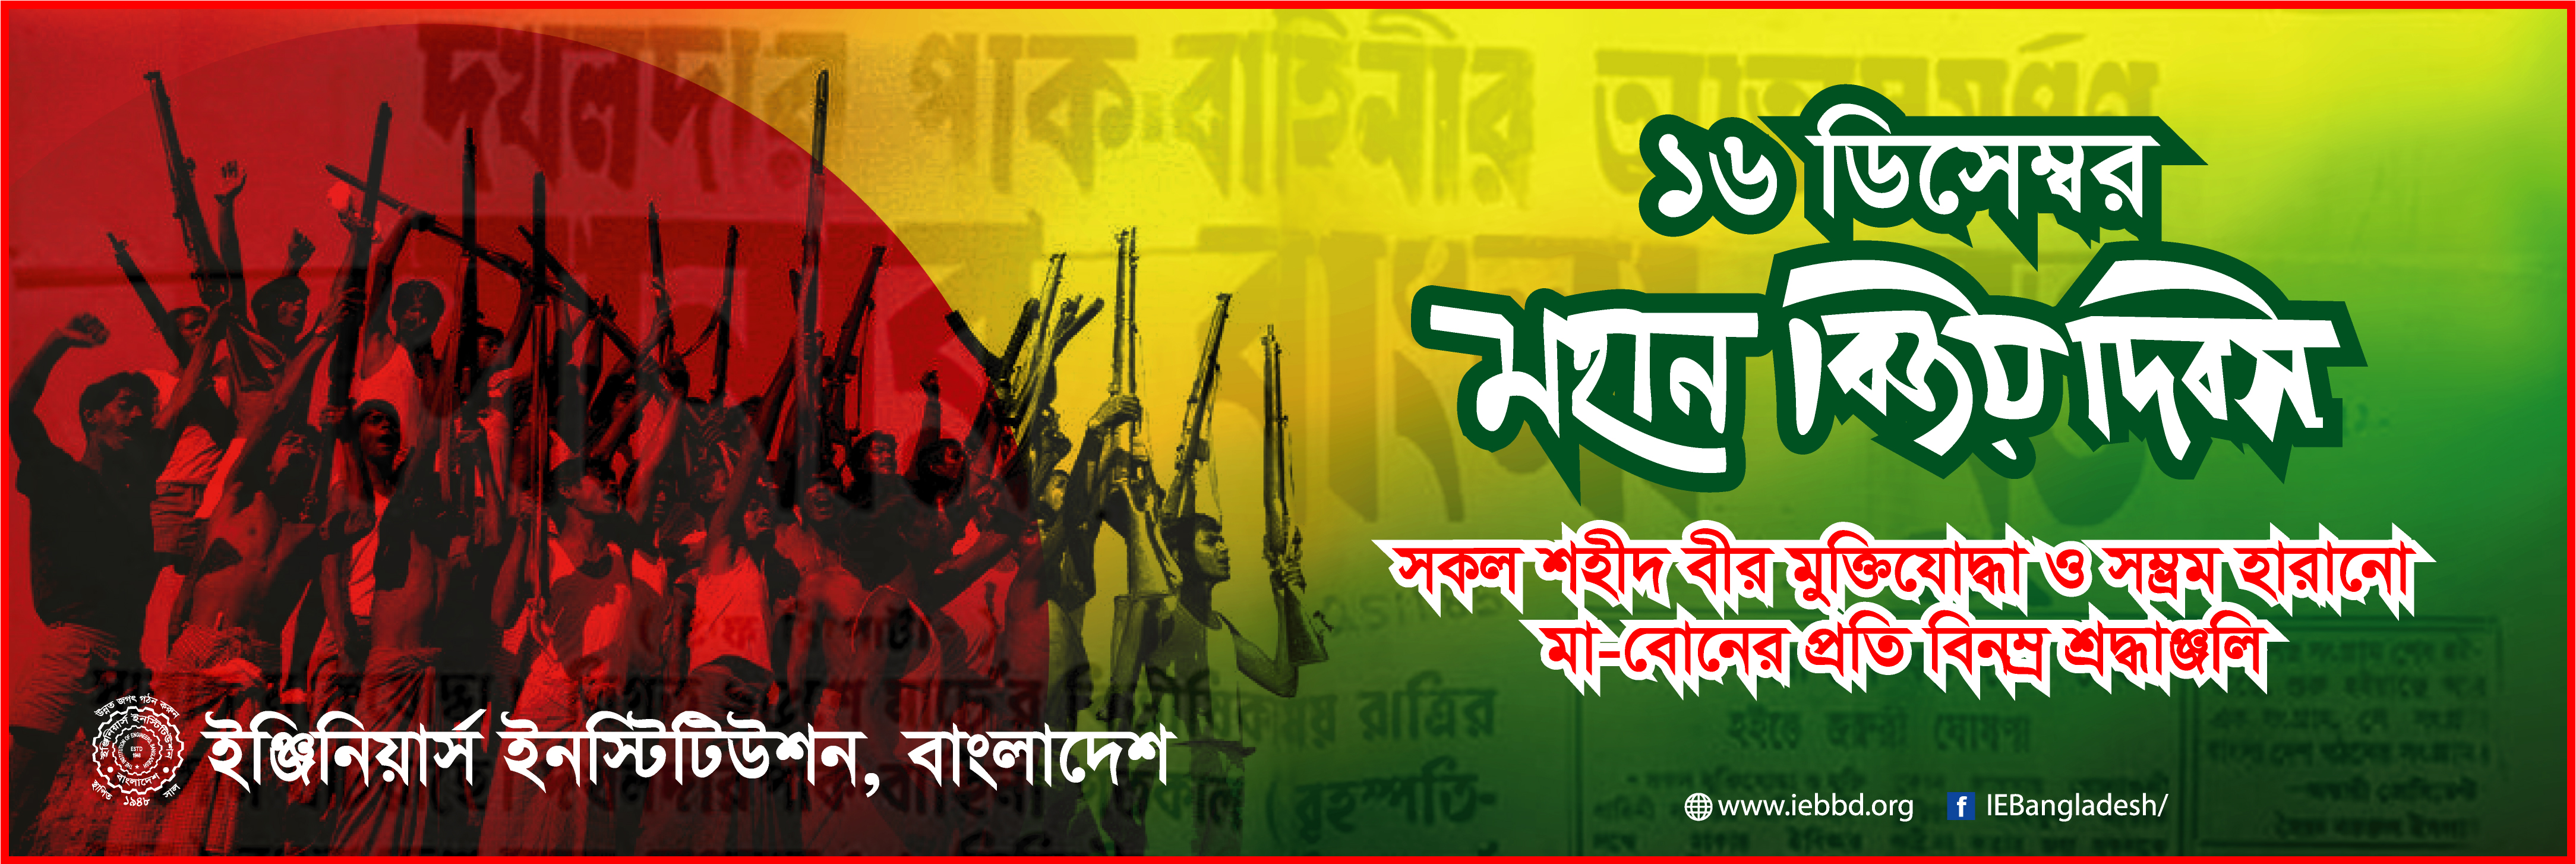 16 December Victory Day: Minds Without Fear, Heads Held High